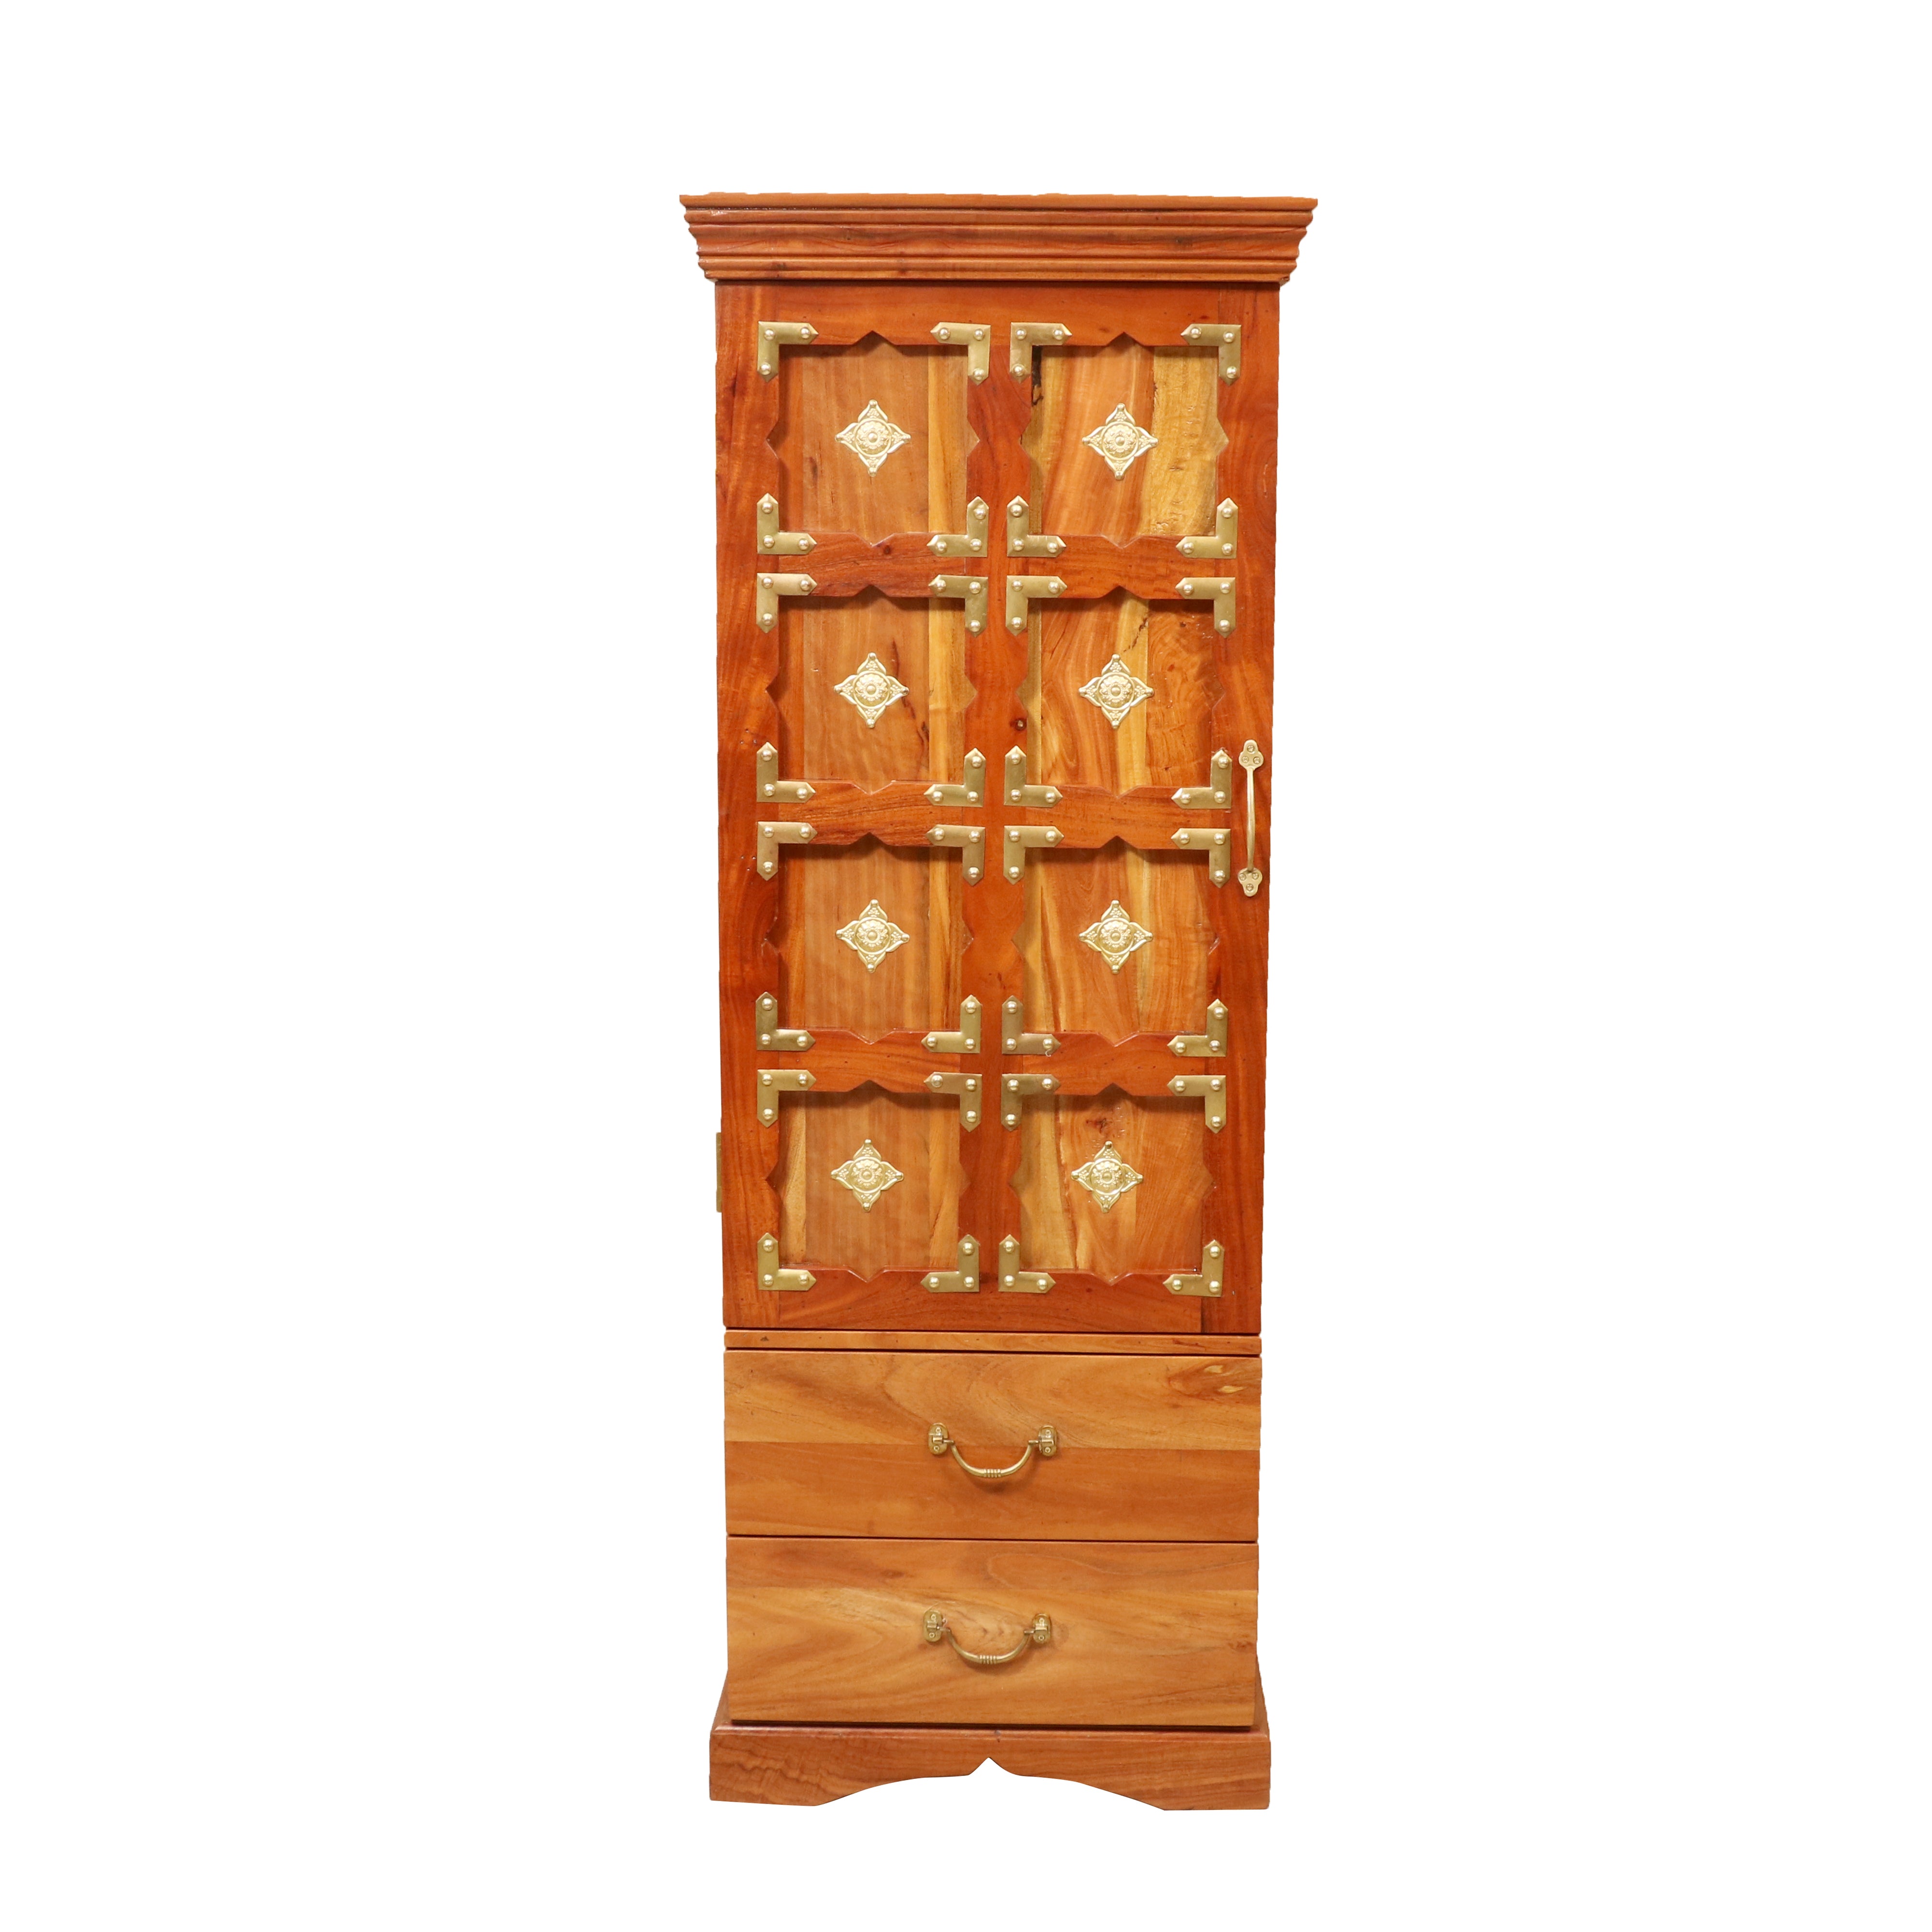 Natural Tone Solid Wood Rustic Cabinet Showcase